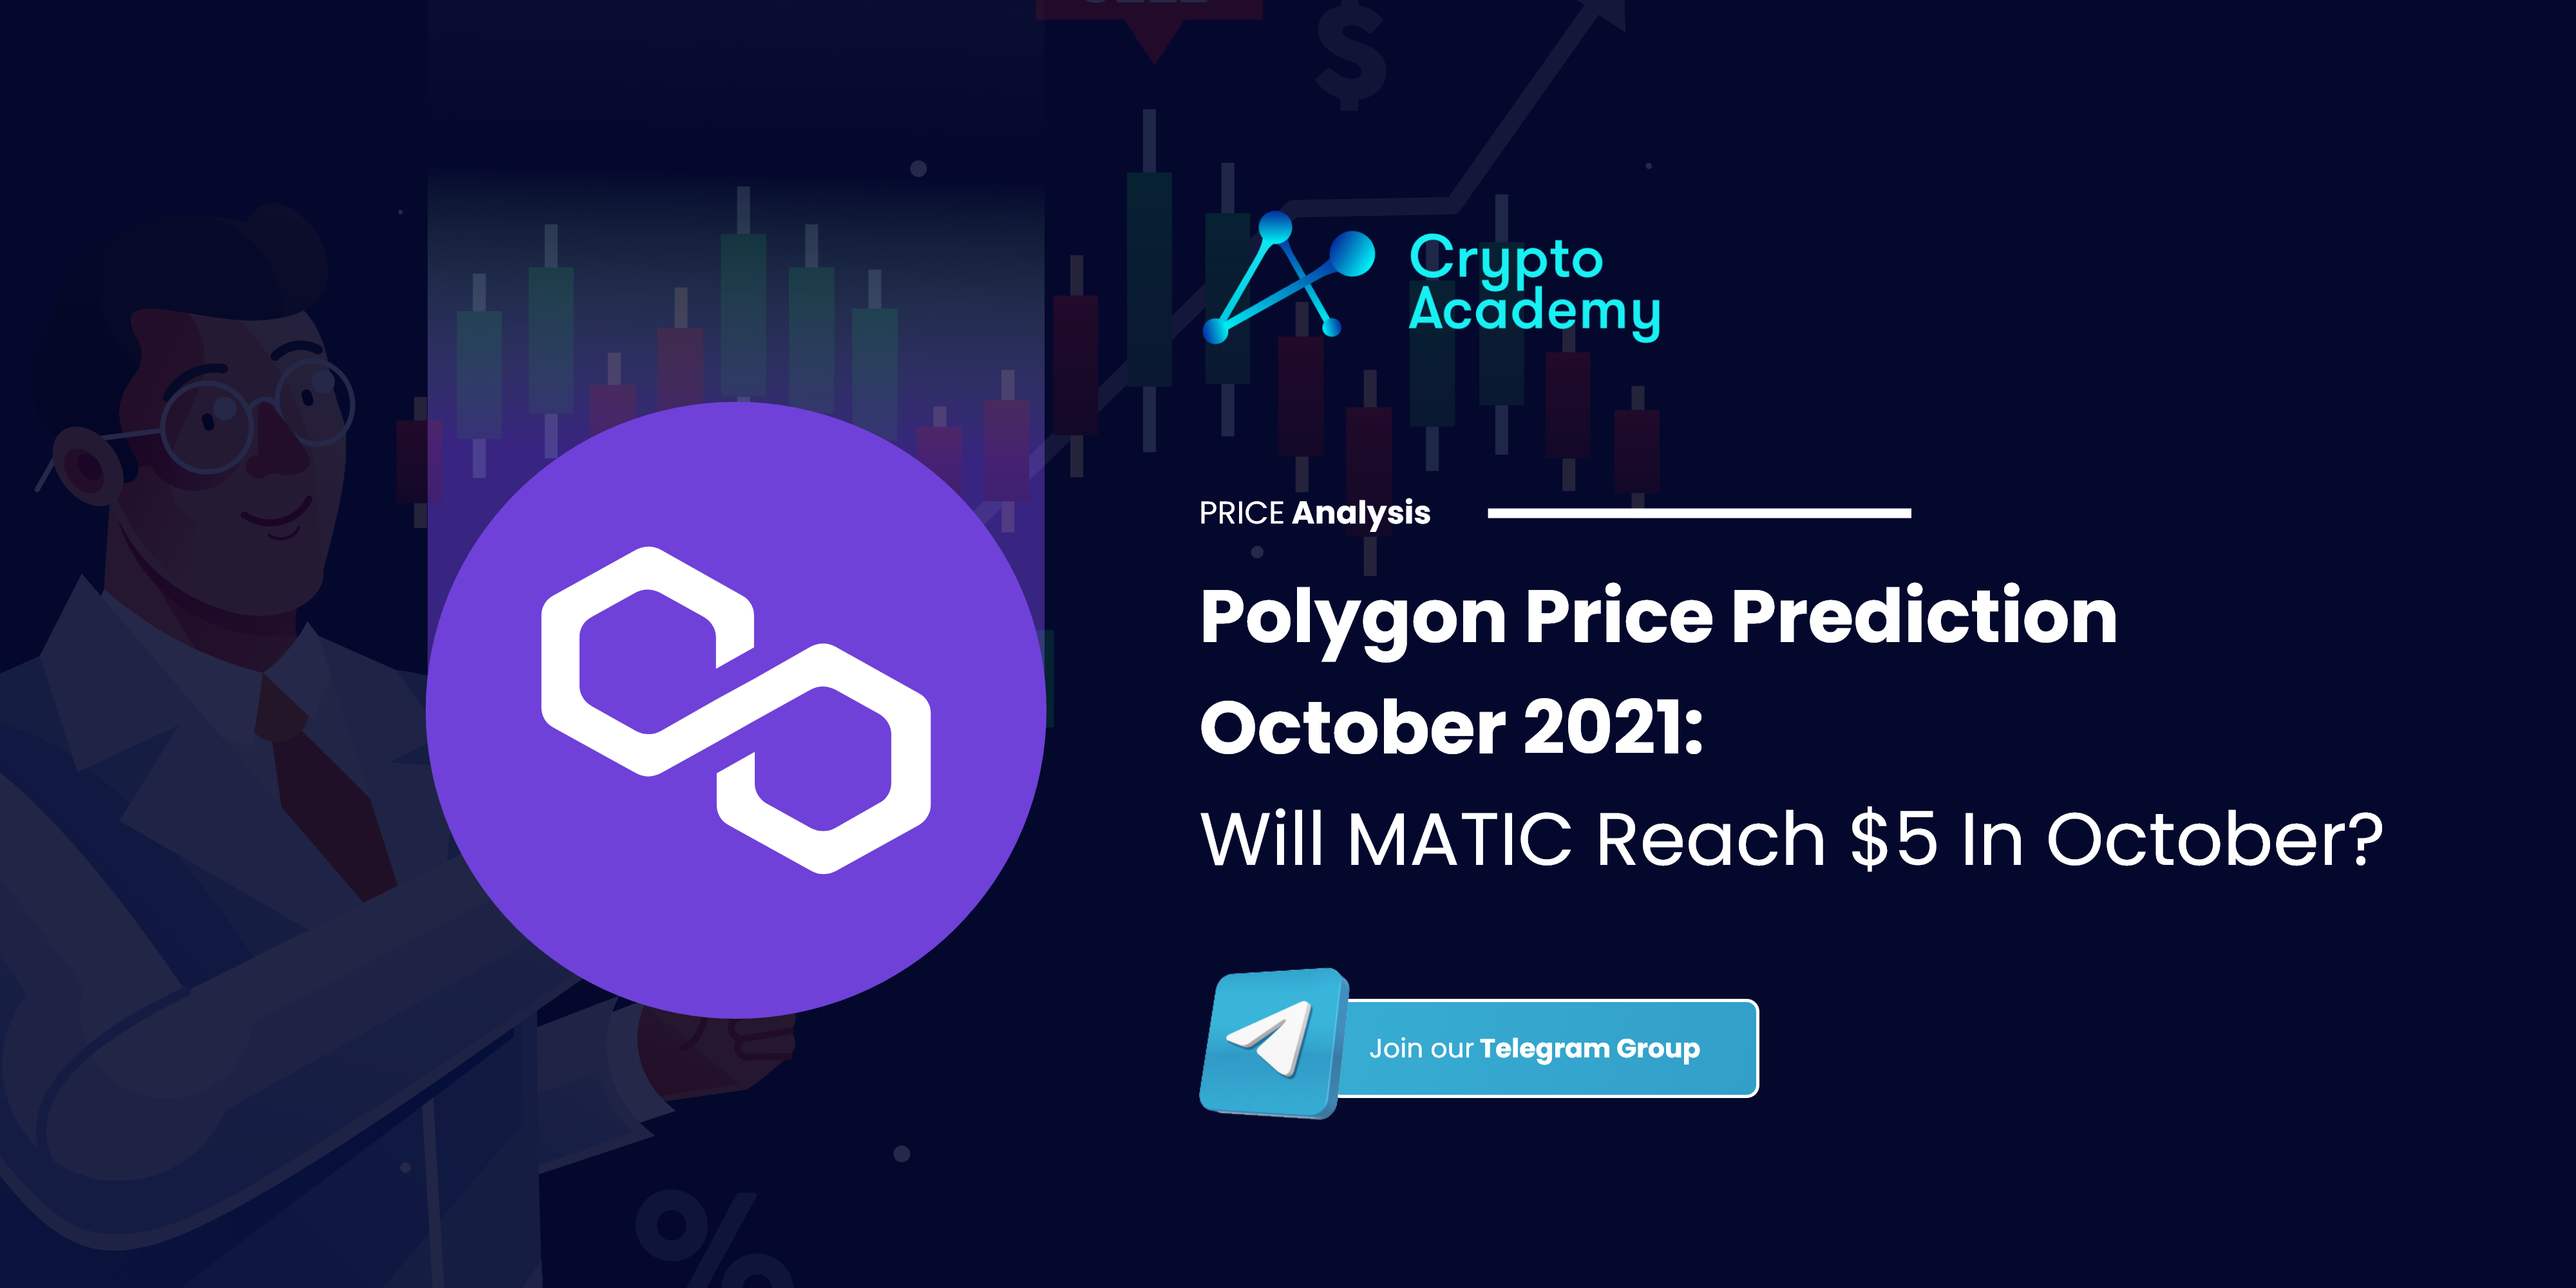 Polygon Price Prediction October 2021: Will MATIC Reach $5 In October